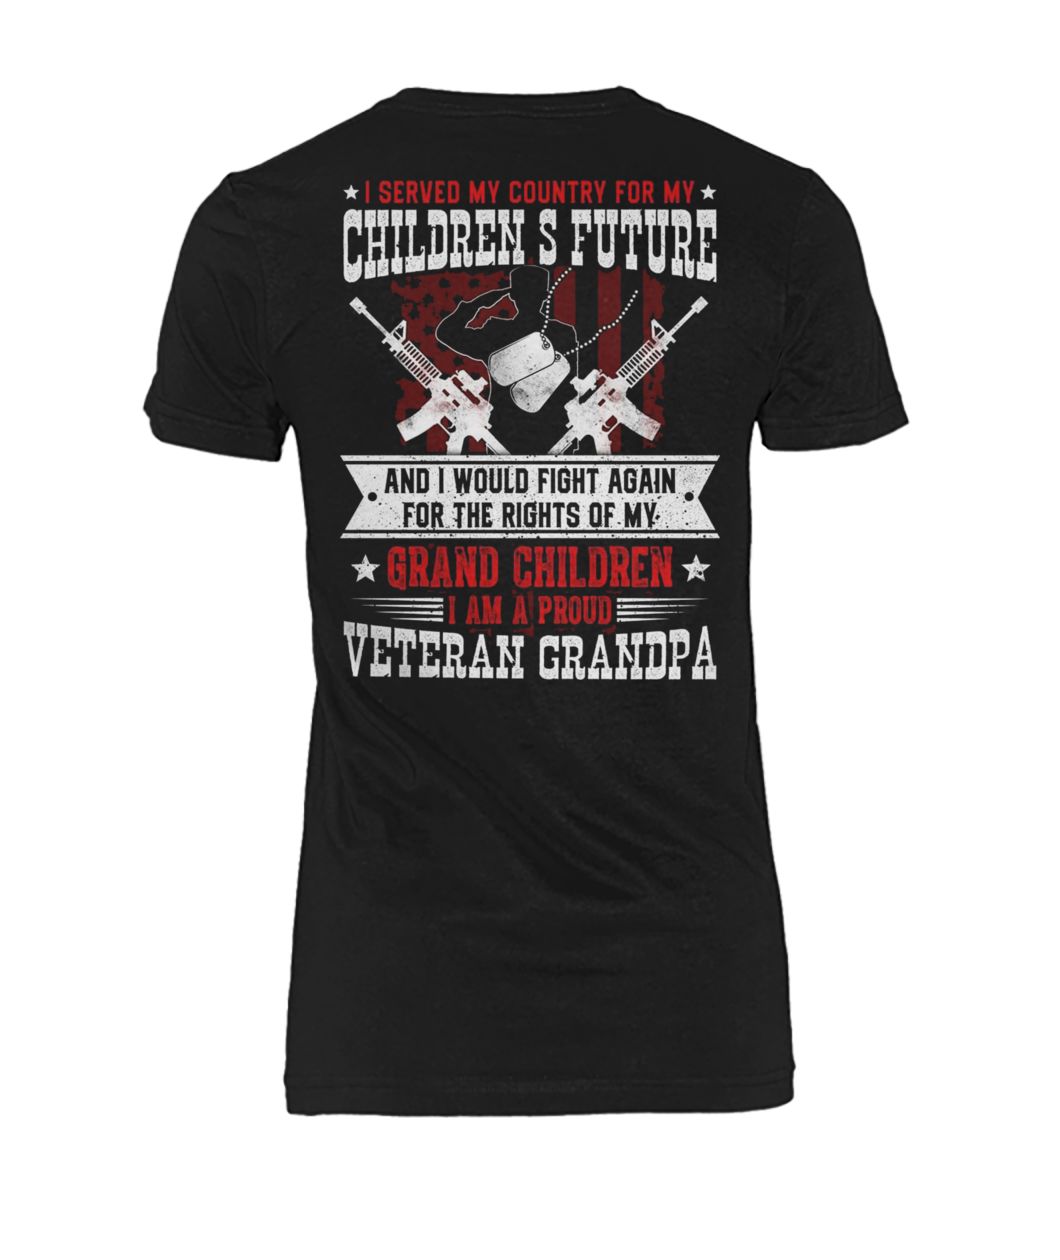 I served my country for my children's future and I would fight again women's crew tee